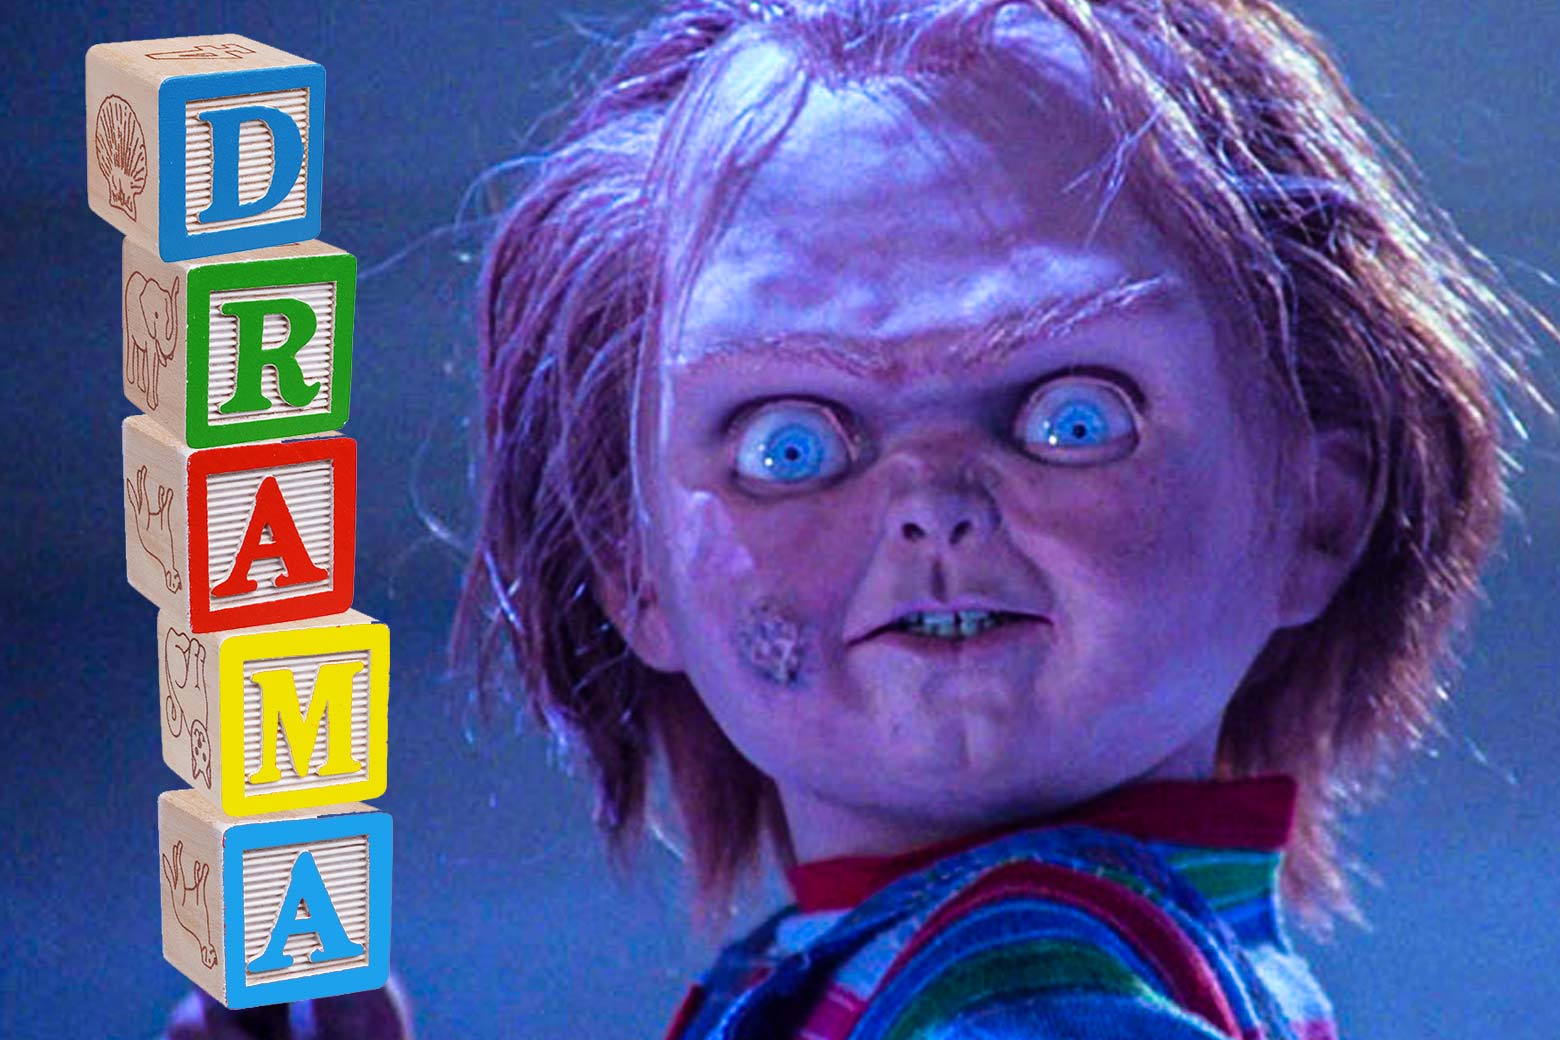 watch childs play seed of chucky free online